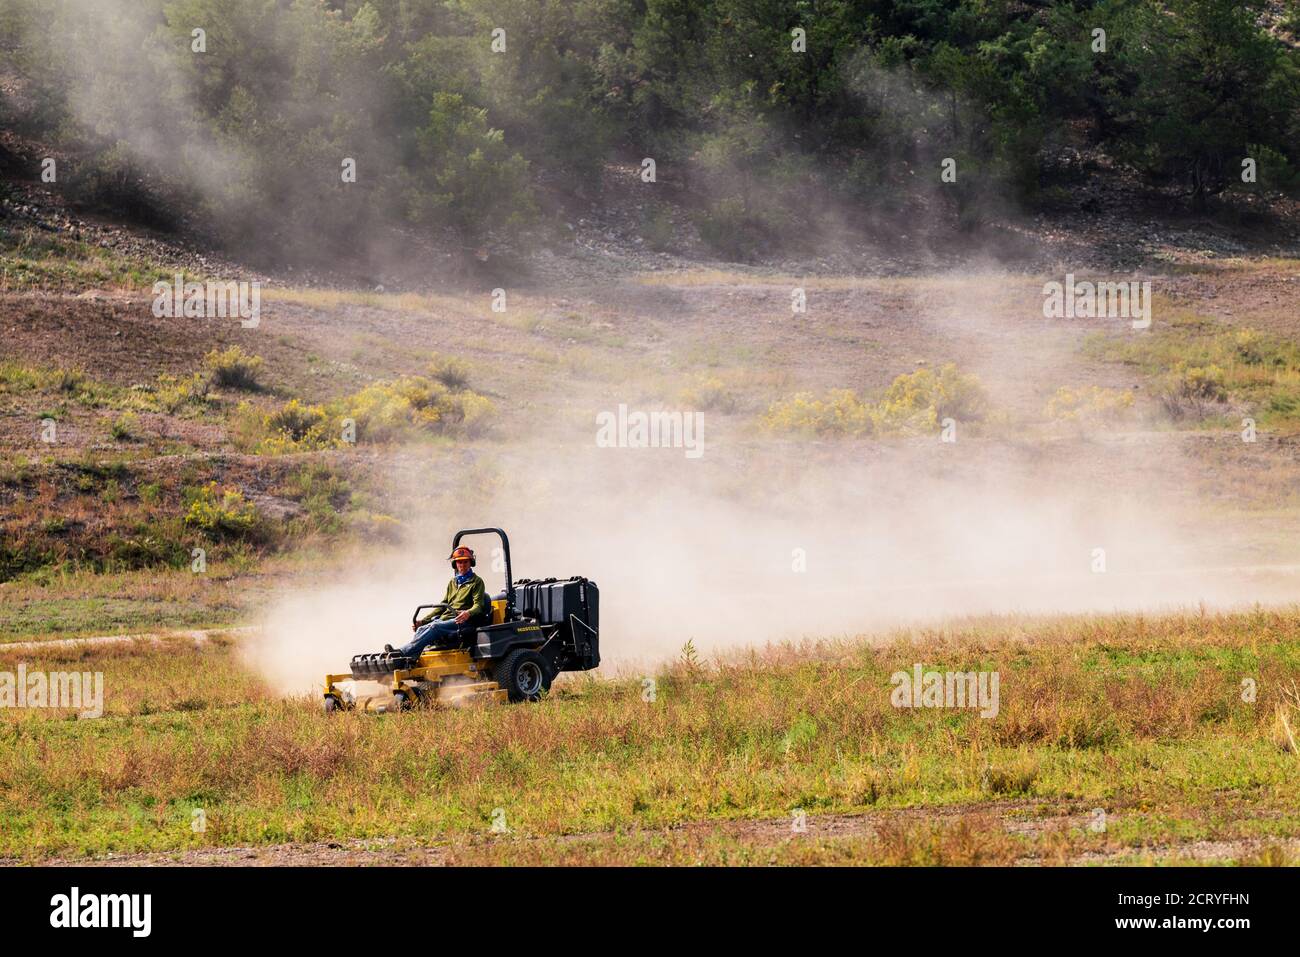 Man mowing dry & dusty pasture with tractor; Central Colorado; USA Stock Photo